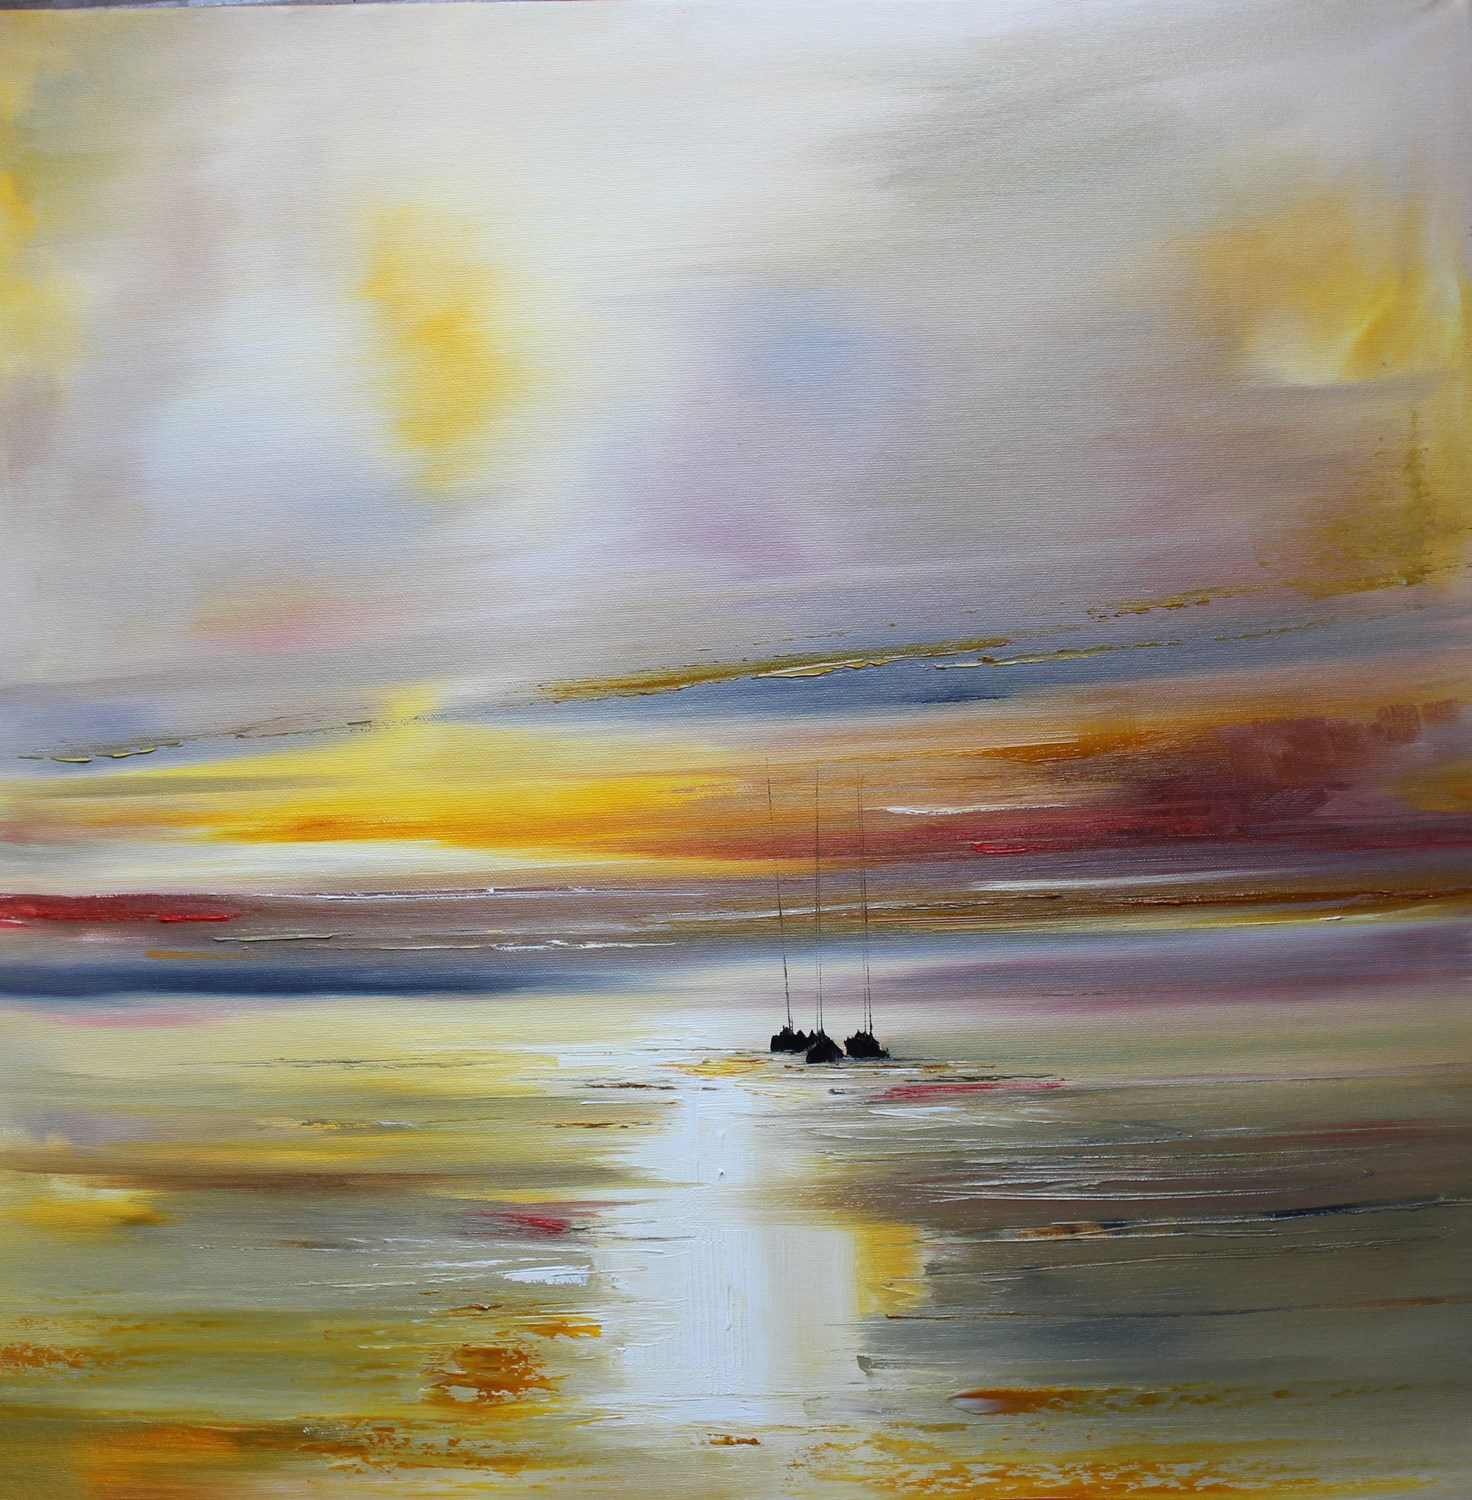 'A Path of Light on the Sea' by artist Rosanne Barr